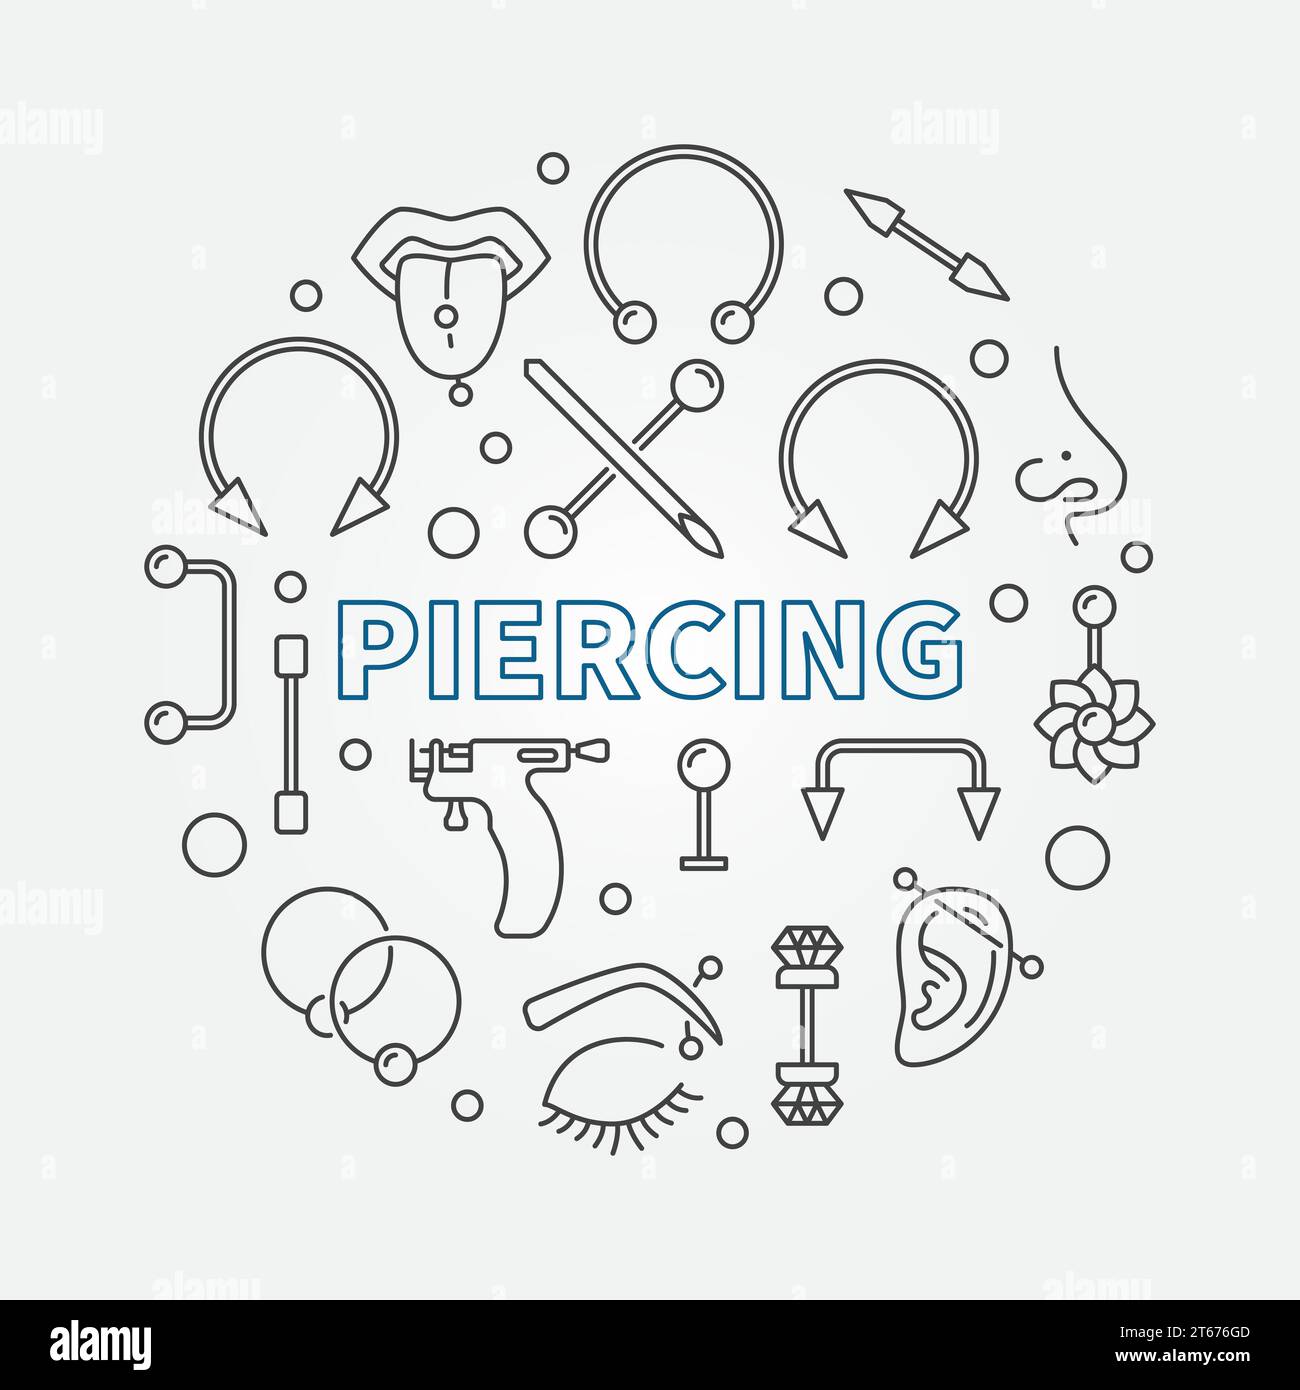 Piercing circular concept vector illustration in thin line style made with cute piercings icons Stock Vector